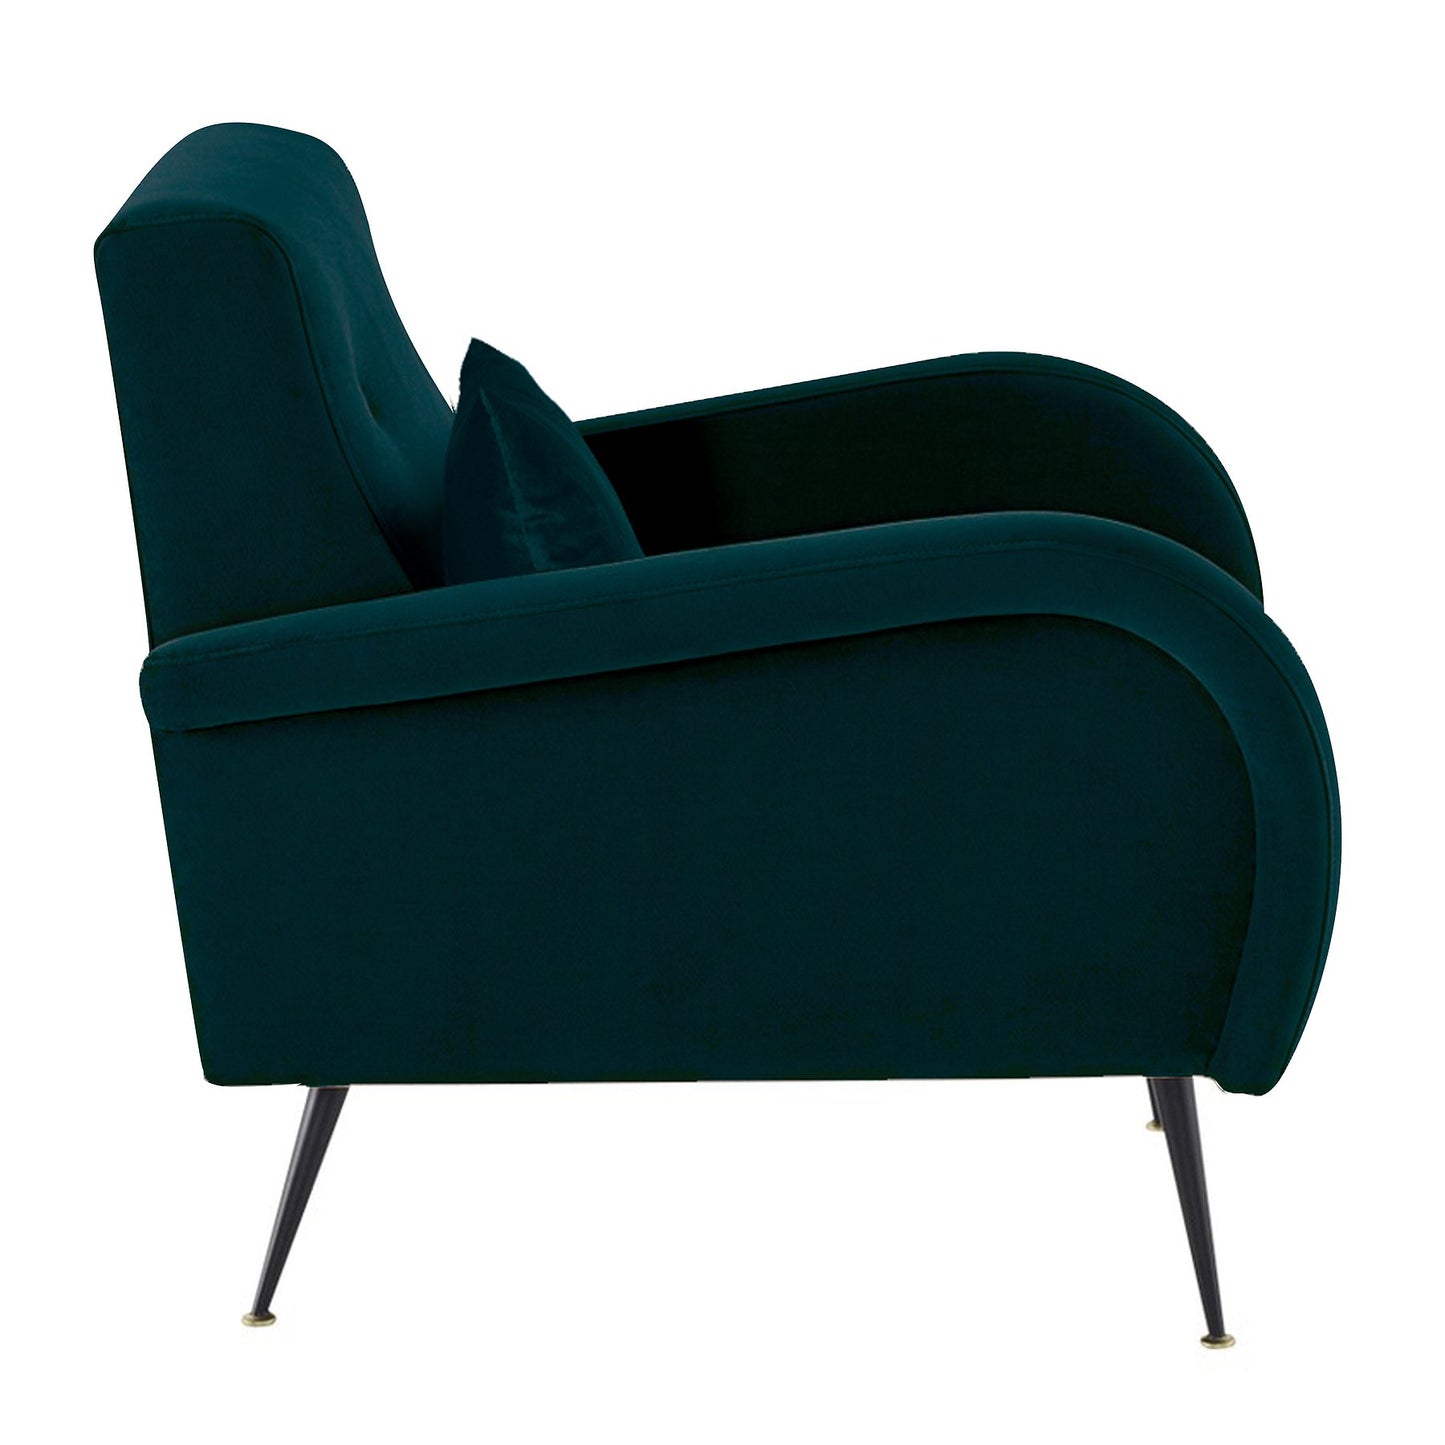 basso - lounge chair - Dreamart Gallery